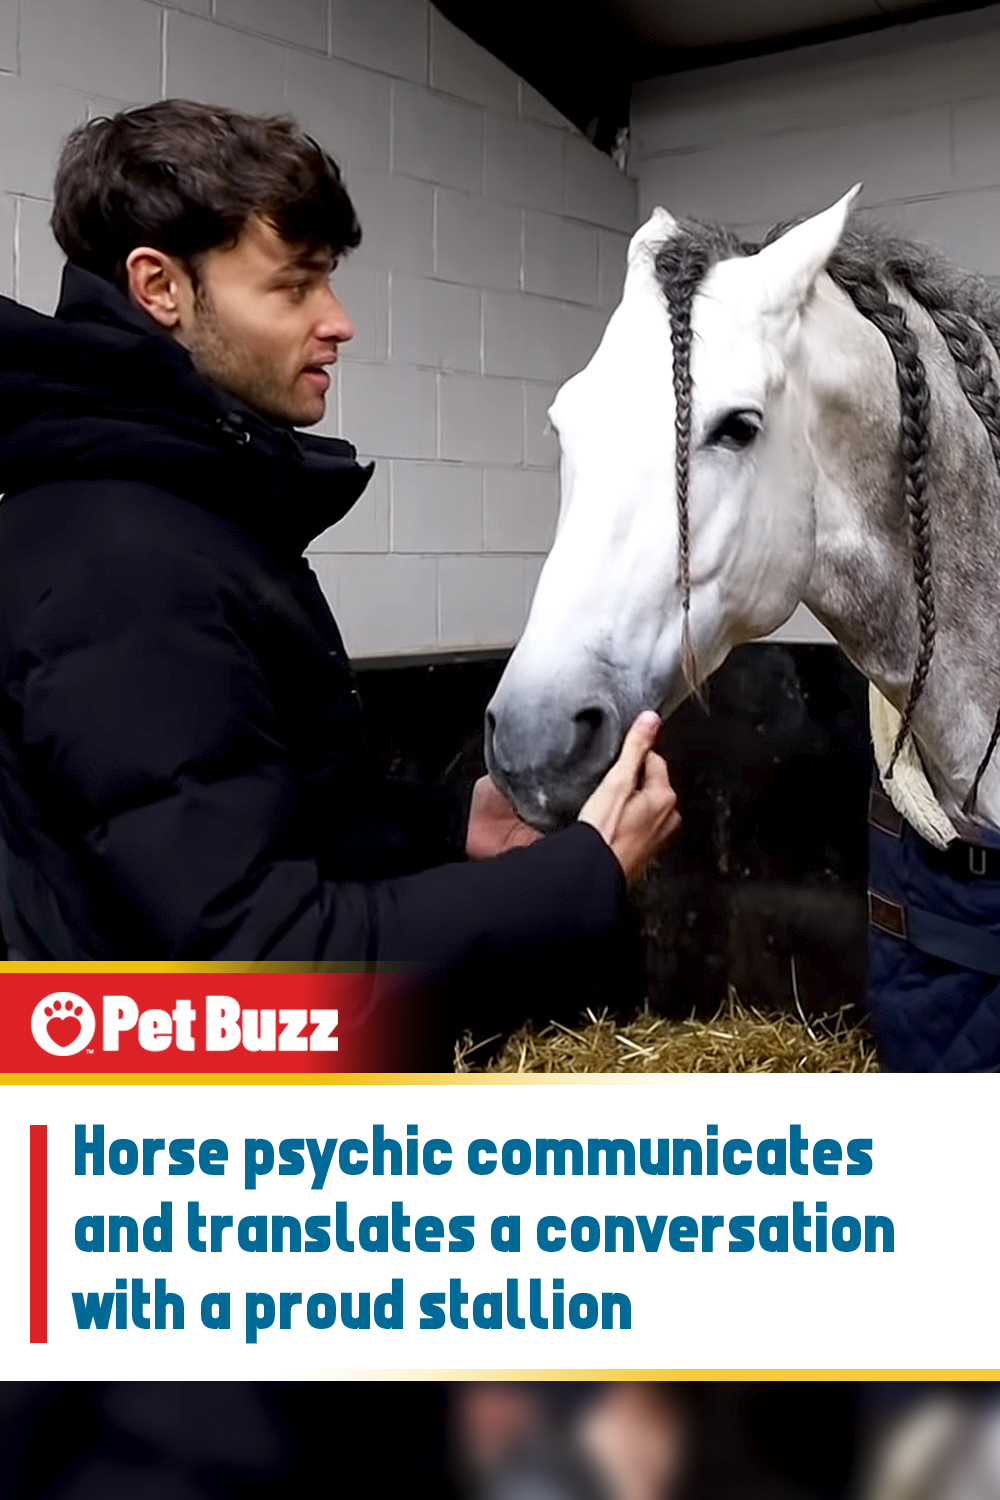 Horse psychic communicates and translates a conversation with a proud stallion